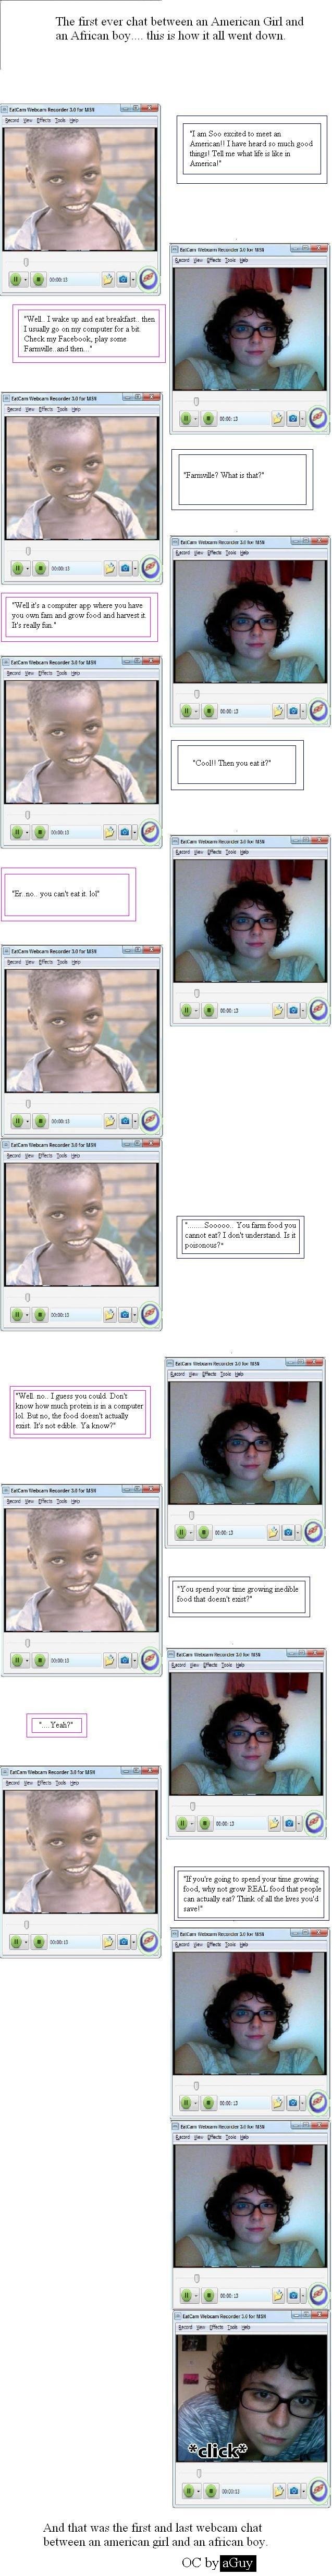 African Web Chat. Not me in pictures... found the three pictures online.. The first ever chat between an American Girl and an African boy... this is how it all 